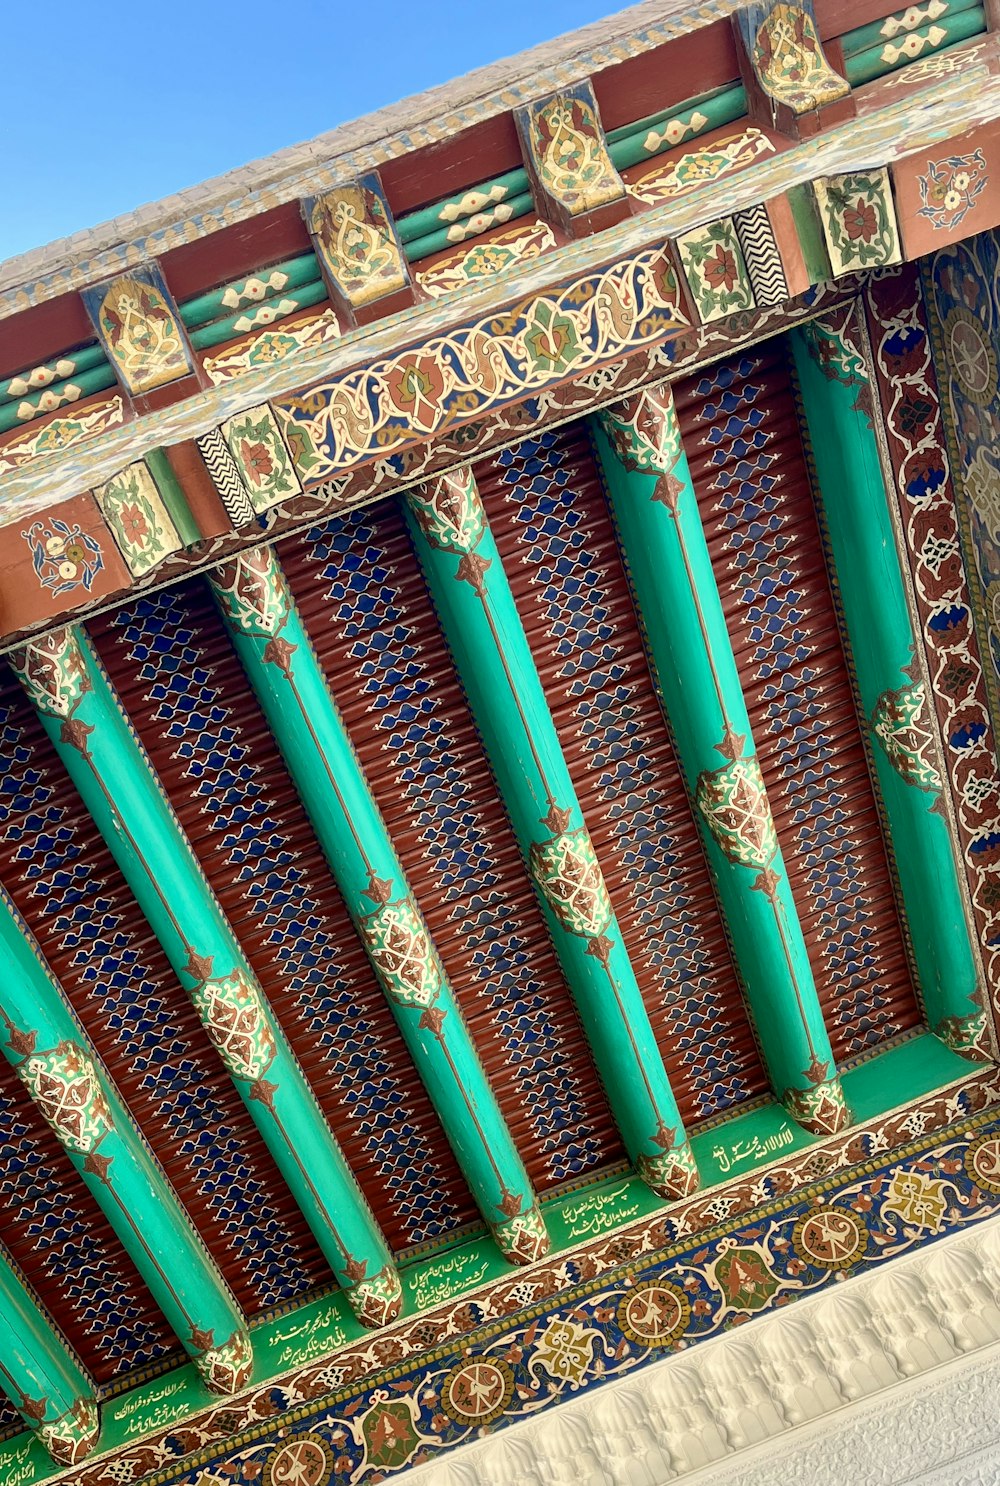 a close up view of a decorative roof